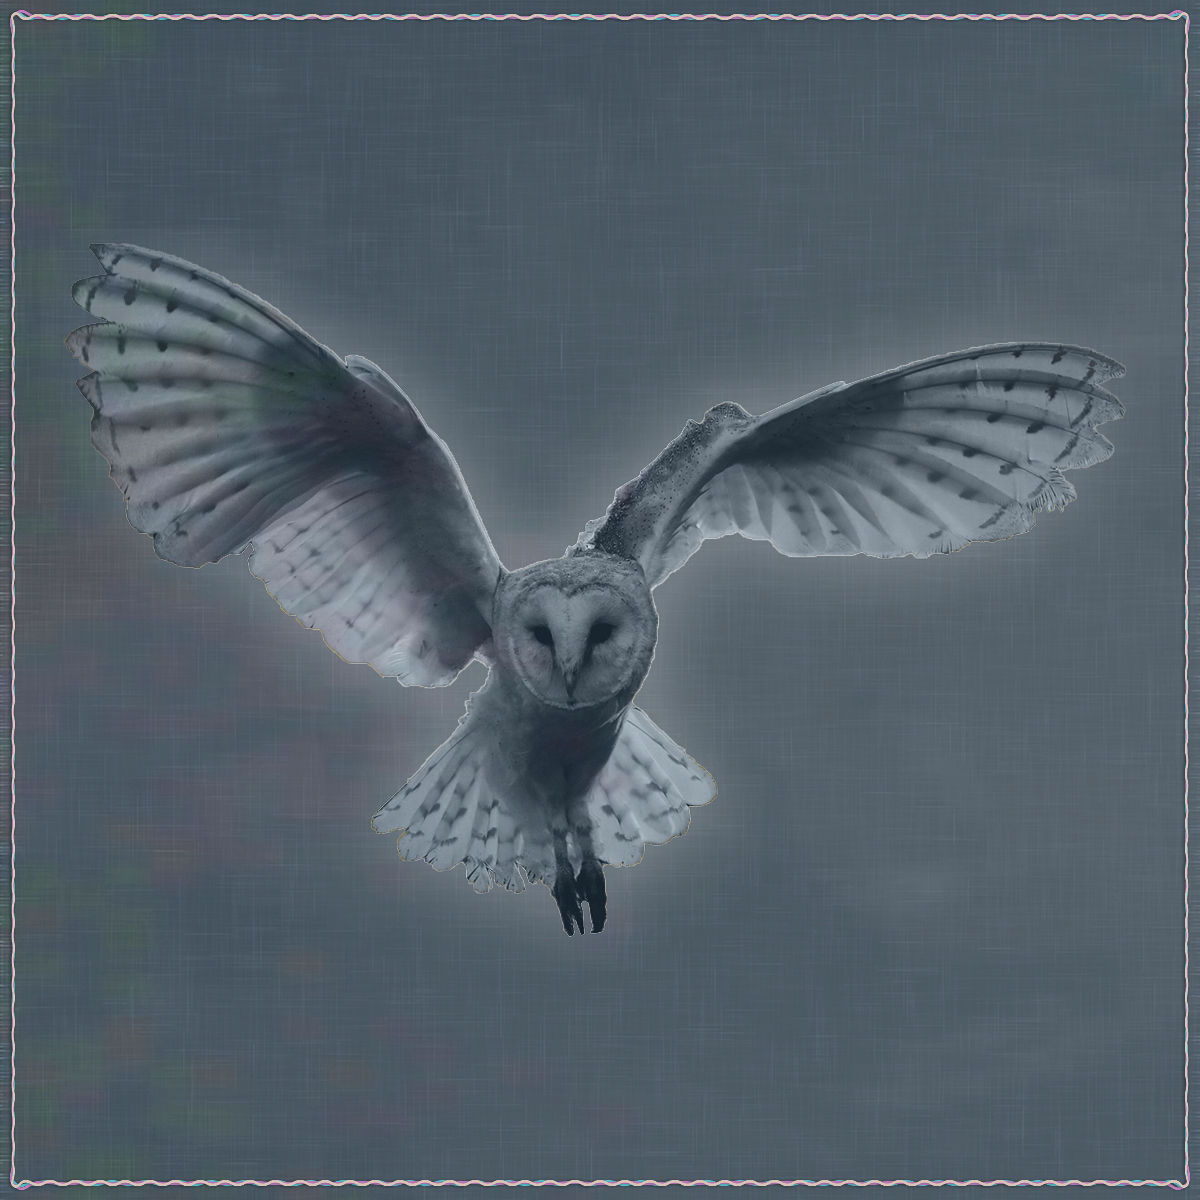 On a gray background, there is a large flying owl.